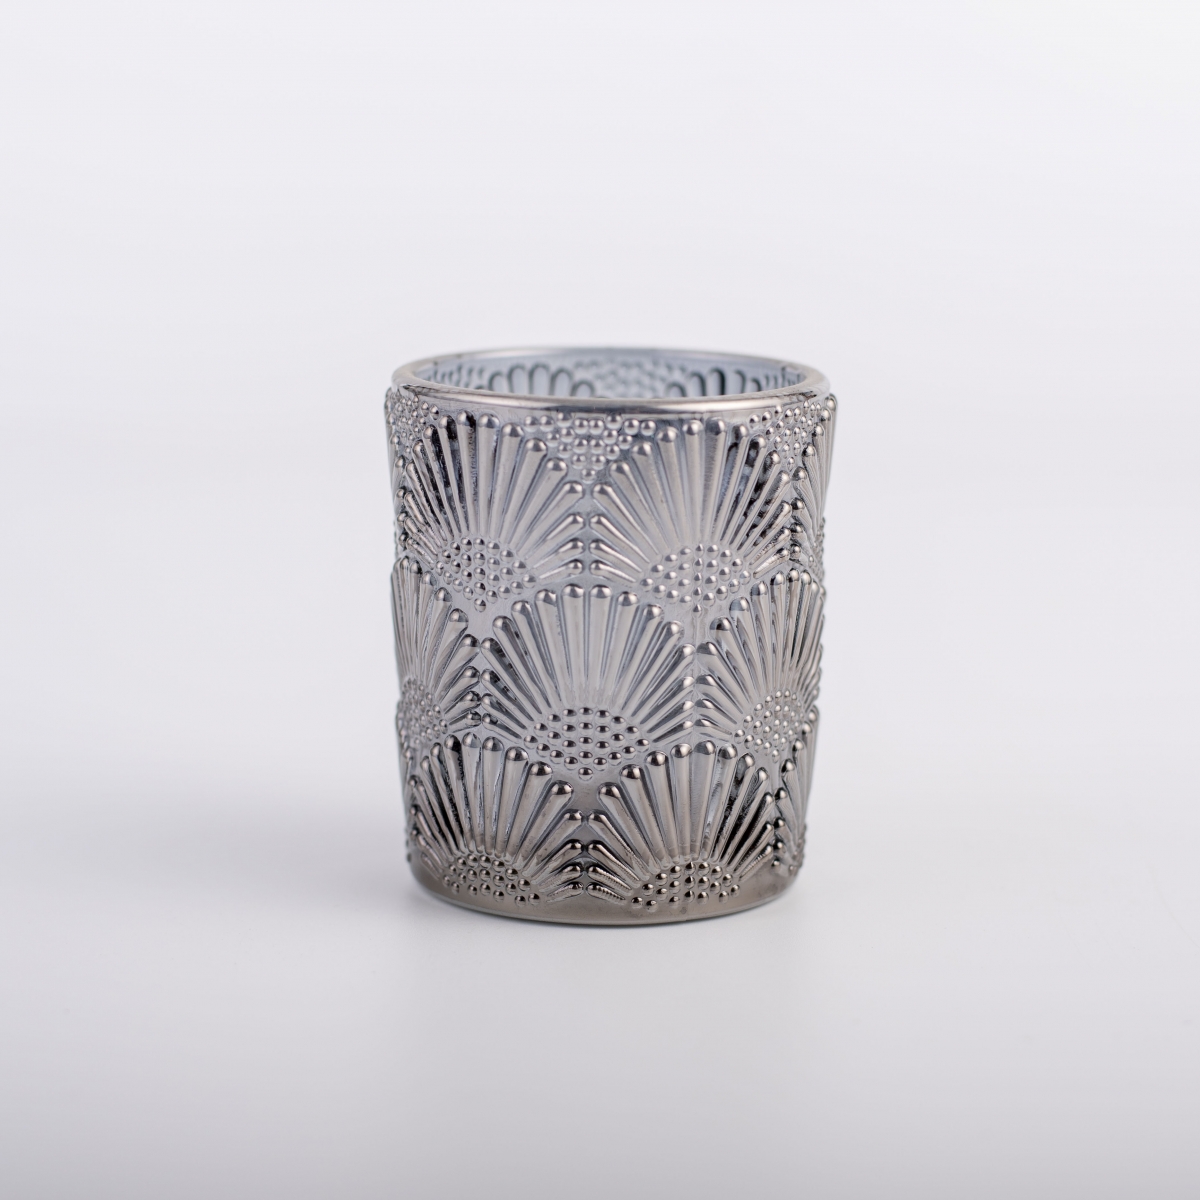 Candle Holder ：Smoke Gray , Emboss Sunflower , Glass Jar ,Candle Stick , China Factory , Good Price ,Russia Market-HOWCANDLE-Candles,Scented Candles,Aromatherapy Candles,Soy Candles,Vegan Candles,Jar Candles,Pillar Candles,Candle Gift Sets,Essential Oils,Reed Diffuser,Candle Holder,